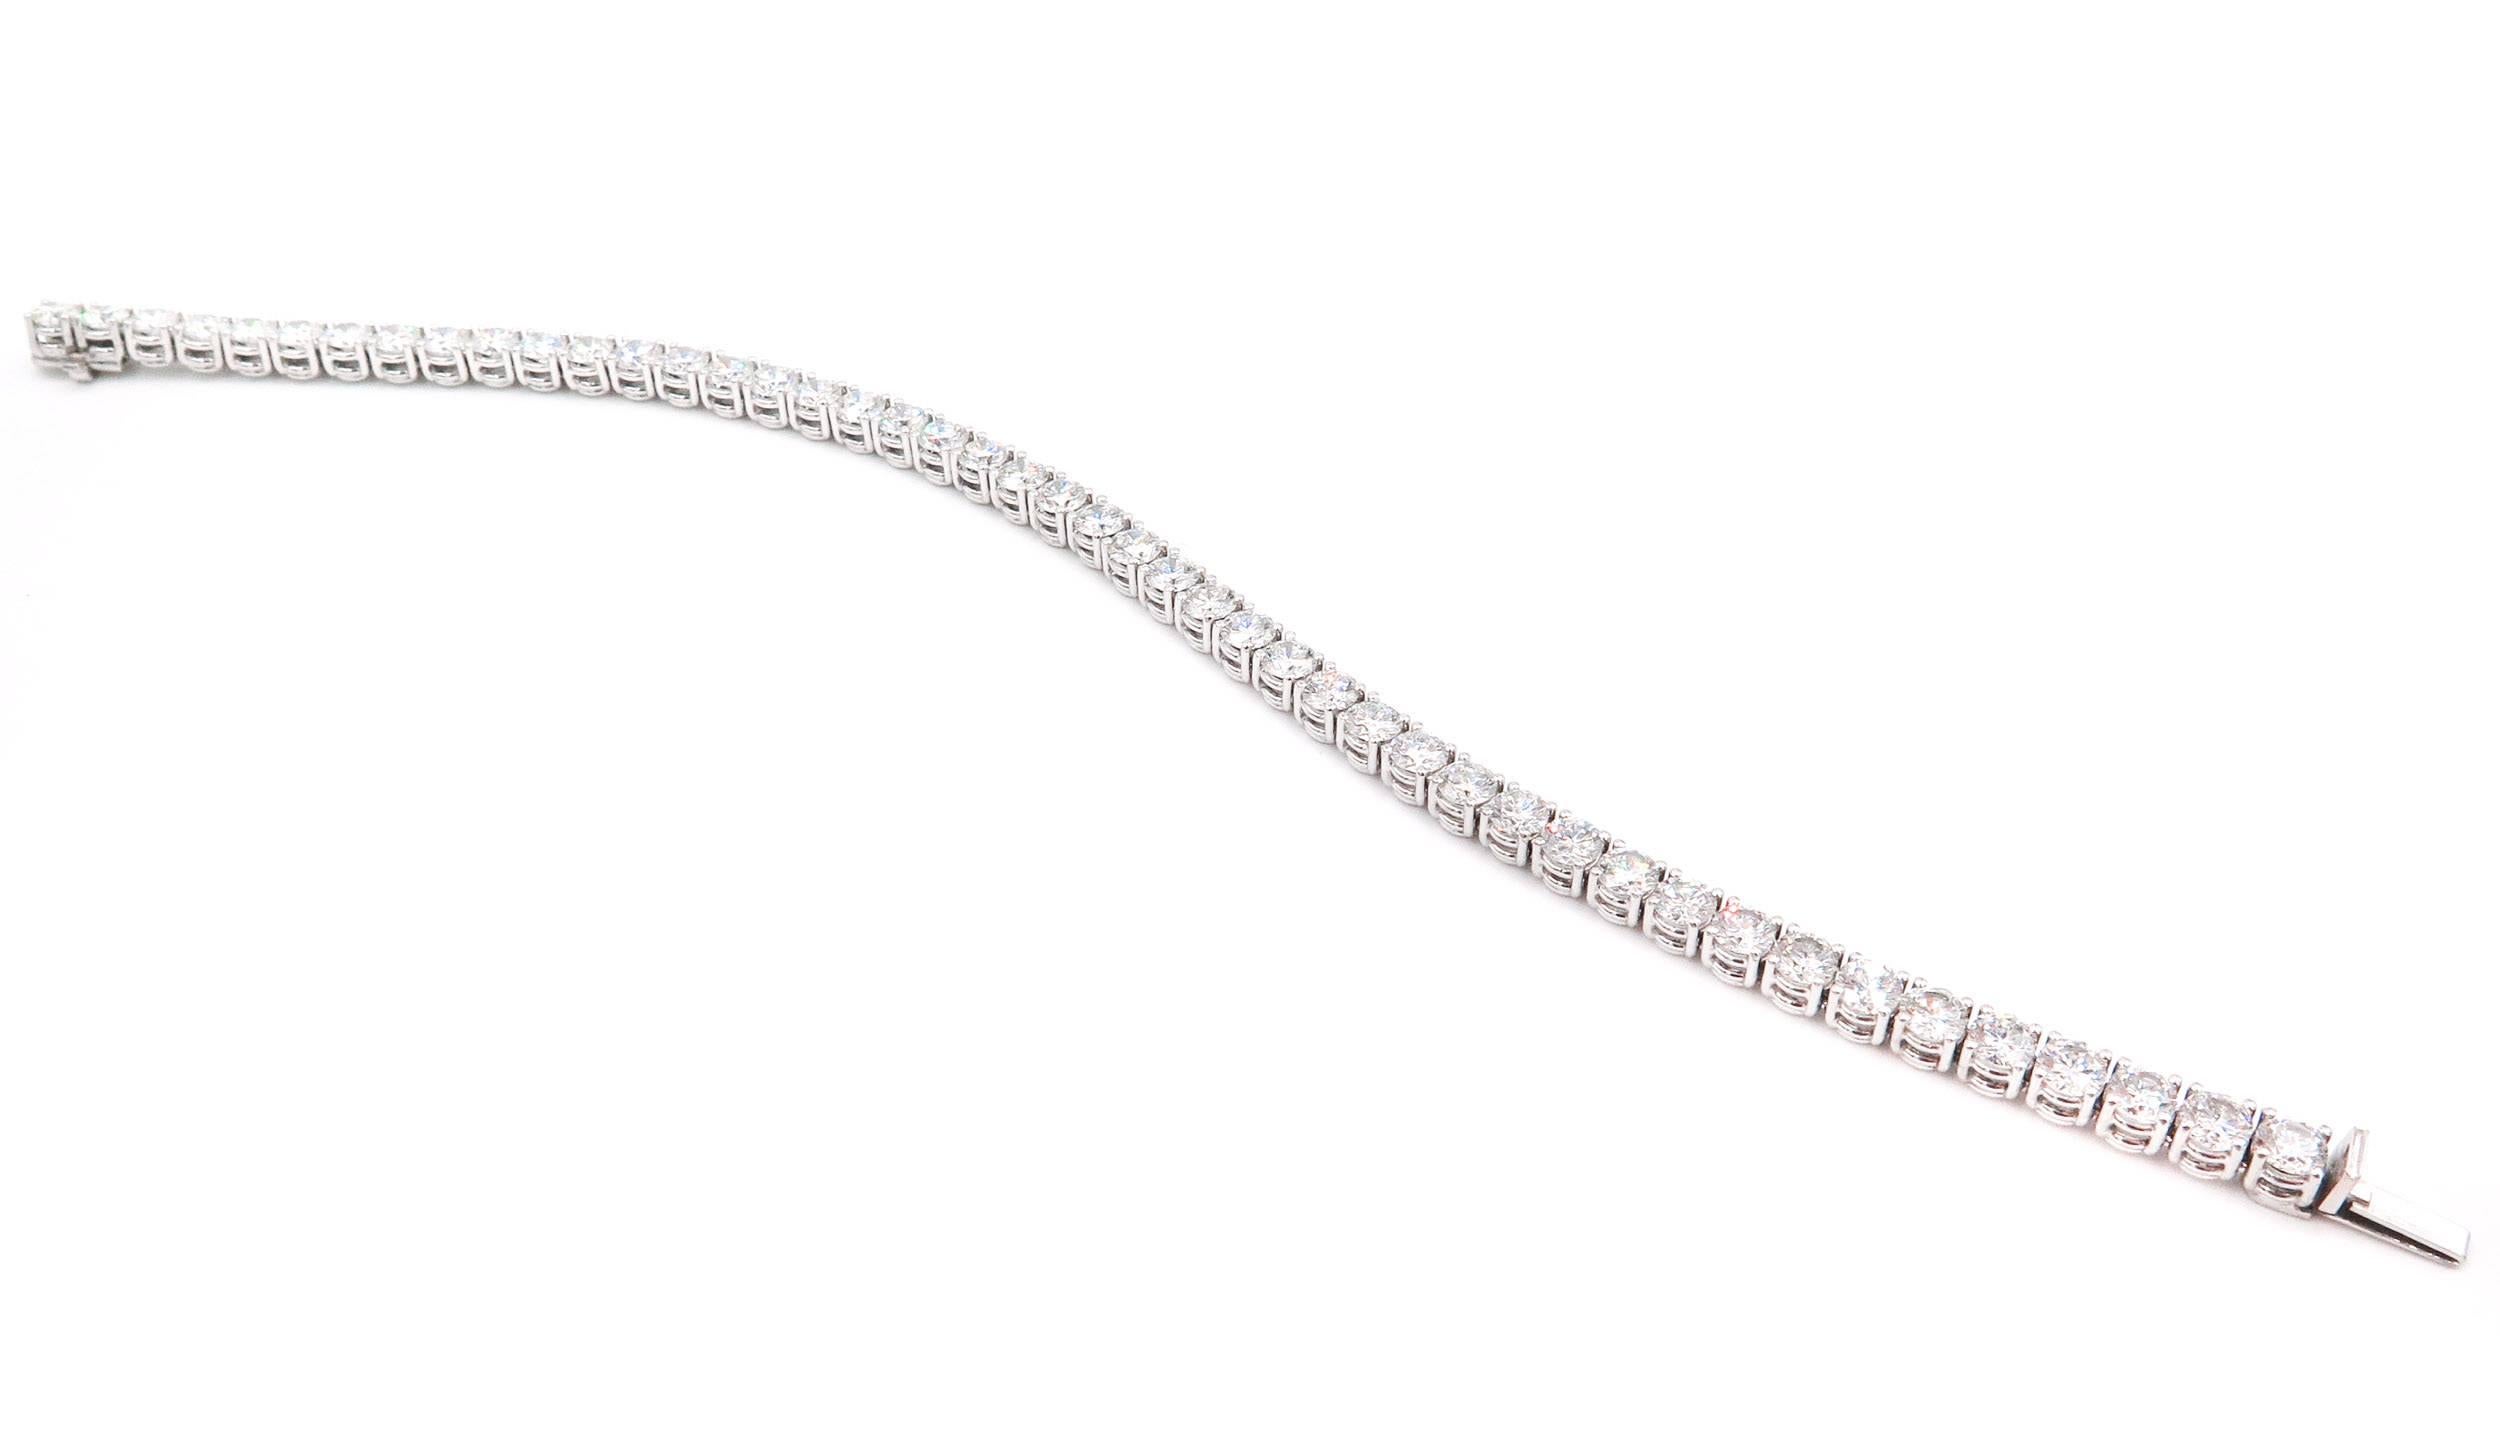 Simply classic! This diamond tennis bracelet features 46 round brilliant cut diamonds with a total weight of 8.86 carats, prong set in platinum. The bracelet has a hidden clasp with safety. A phenomenal Bracelet designed by the legendary Asprey of